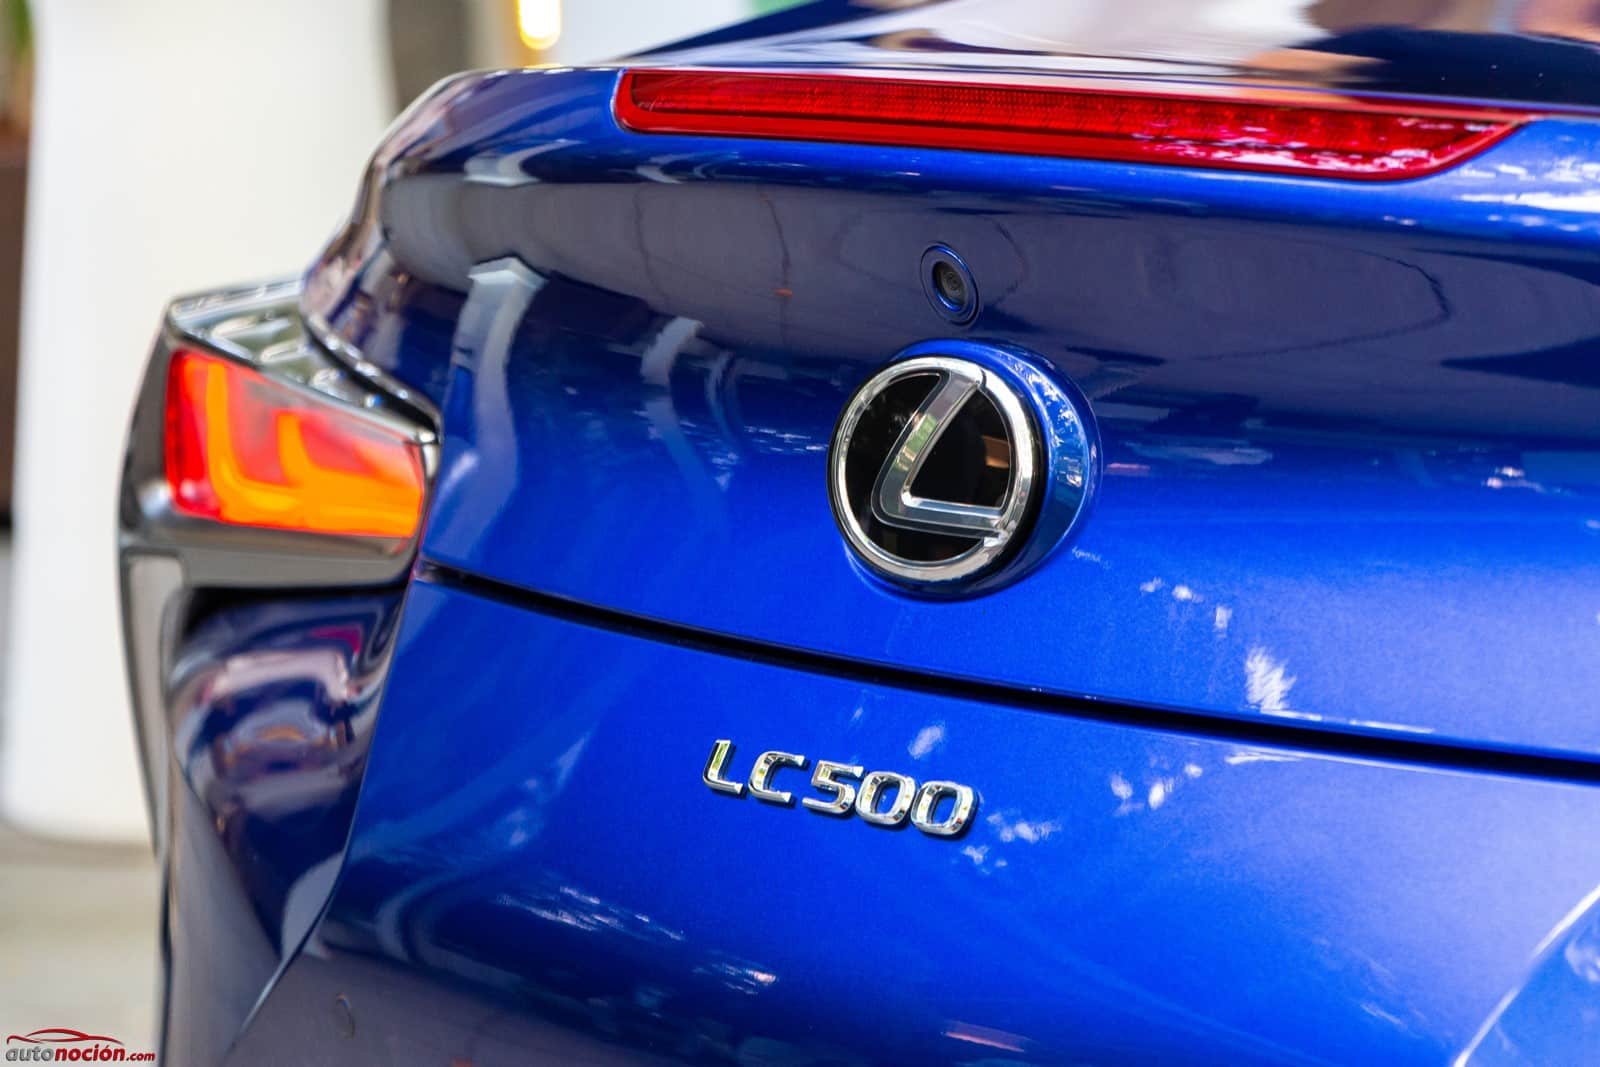 This is How the 2020 Lexus LC 500 Cabrio Convertible Looks Like